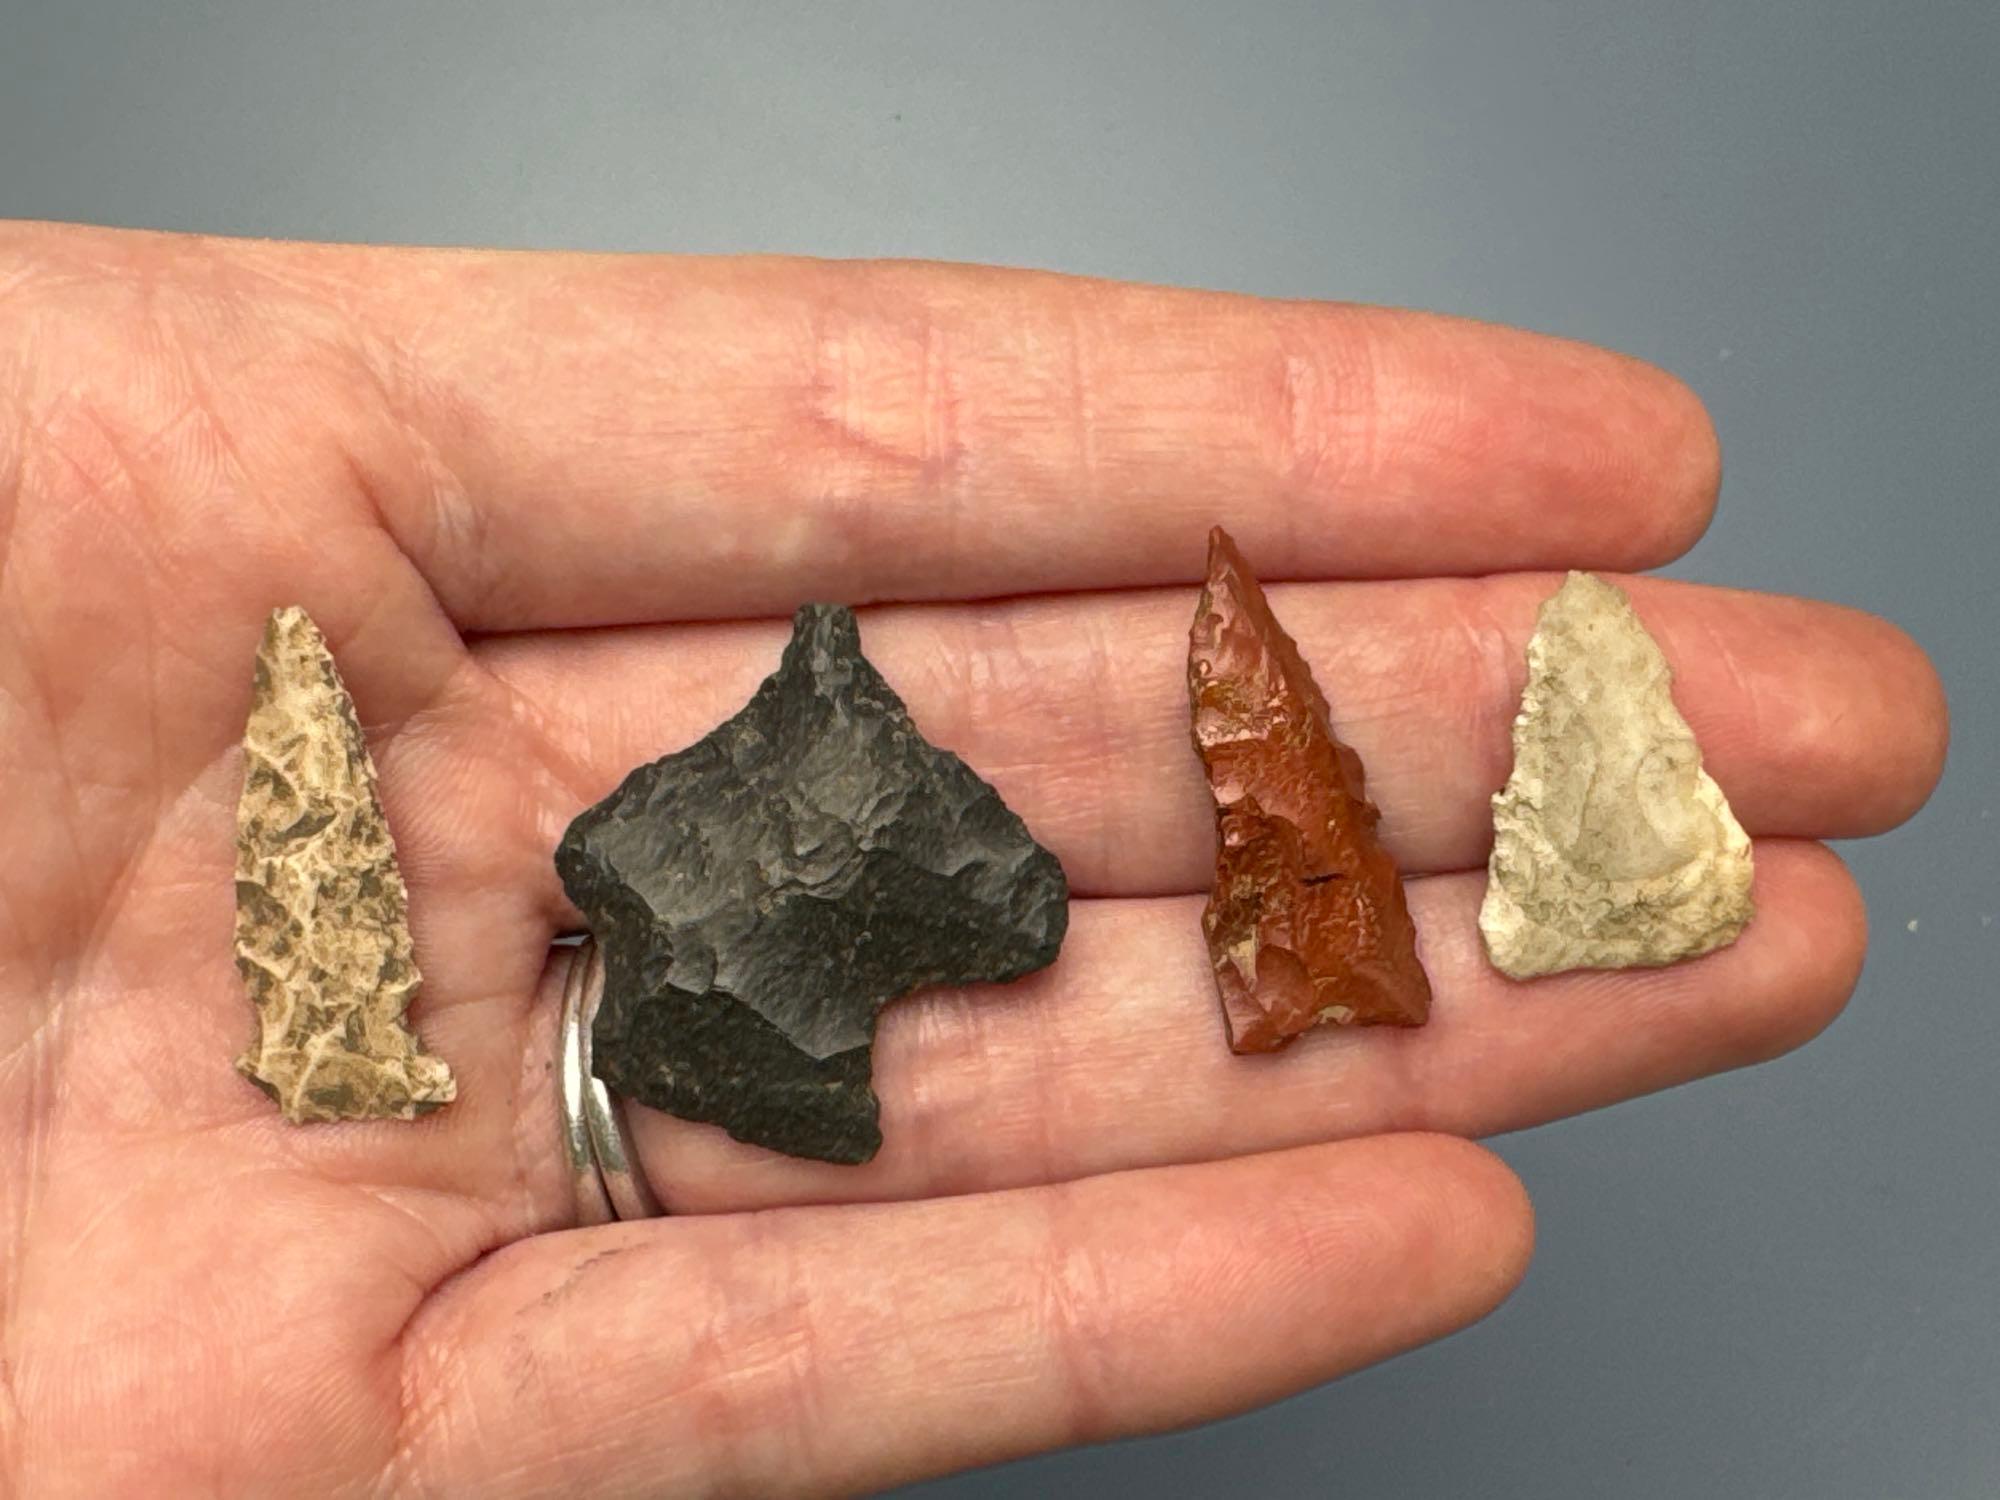 Nice Lot of Various Points, Arrowheads Found in Midwest and Central US States, Longest is 1 1/8"